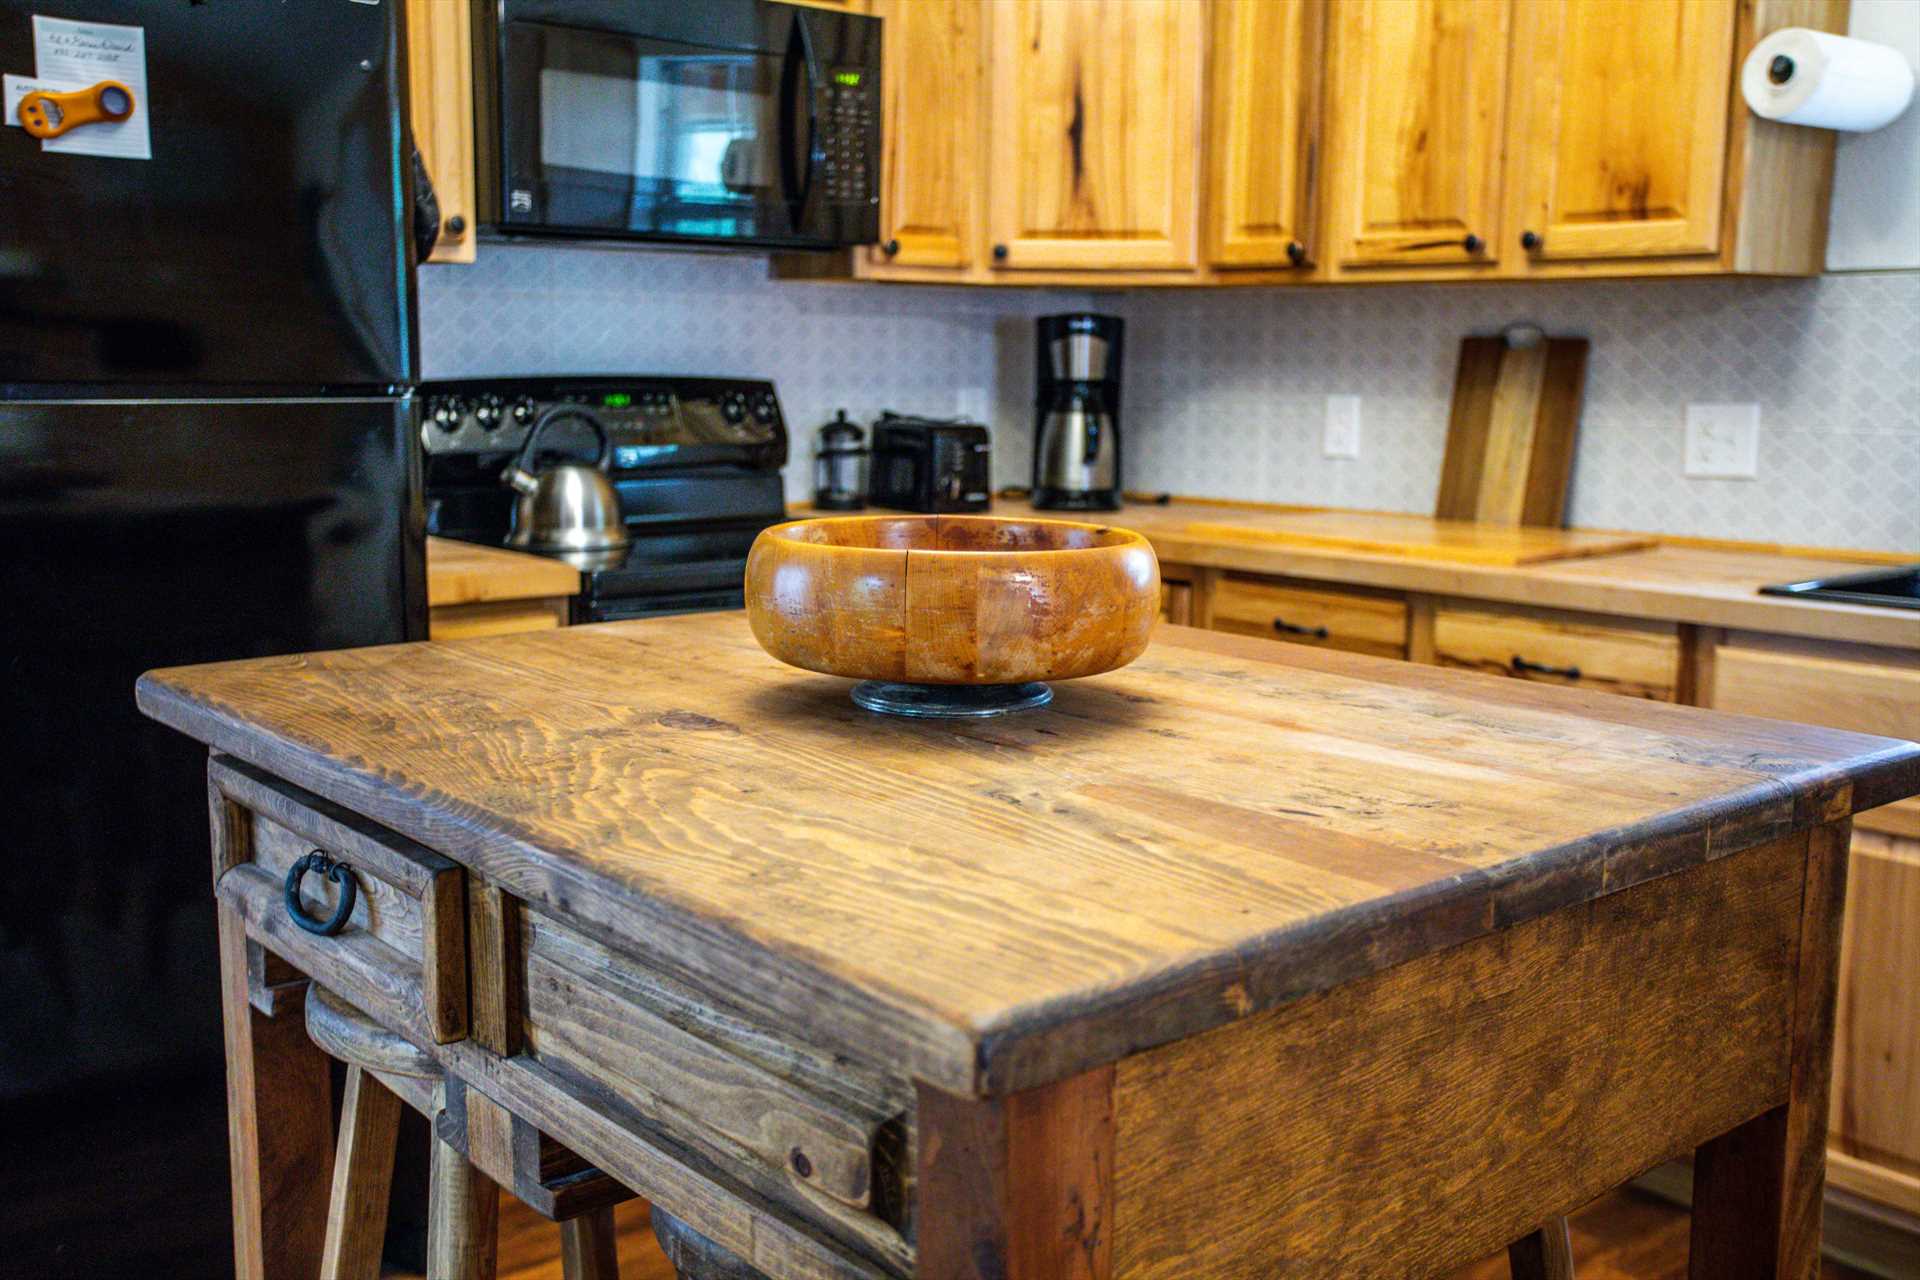                                                 Utility and nostalgia come together in the butcher block-style island in the country kitchen!